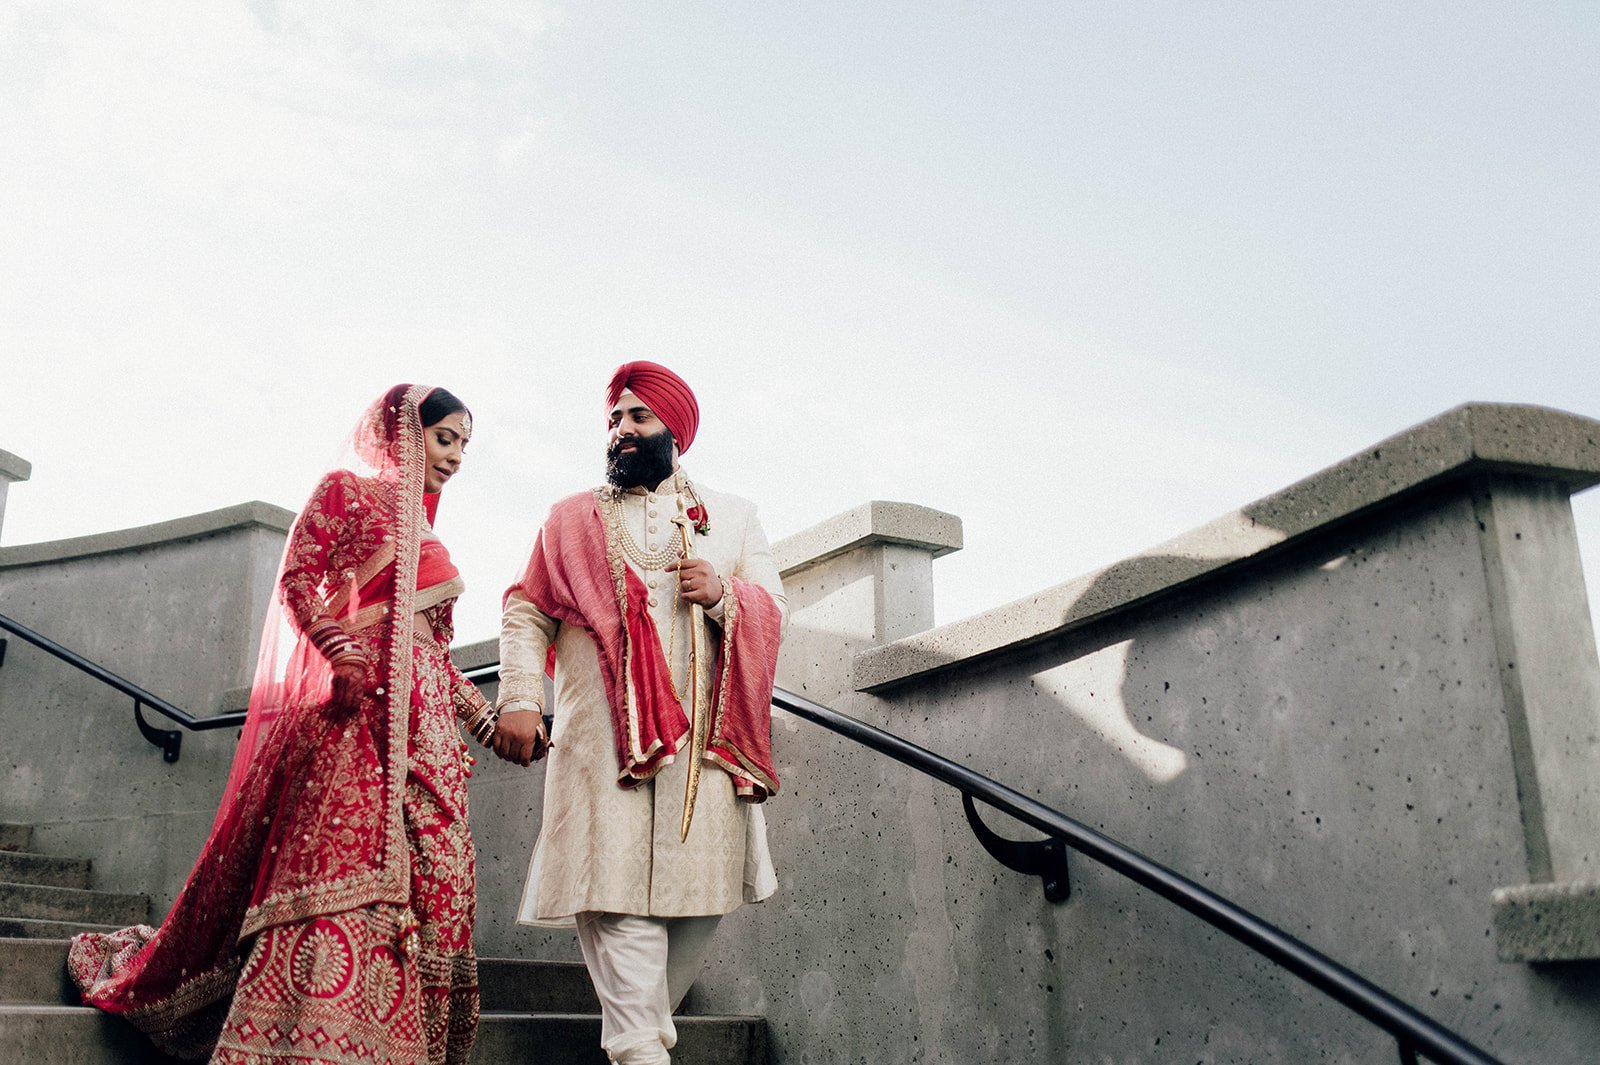 An Indian couple in traditional wedding outfits makes their way down stairs in Vancouver BC. 